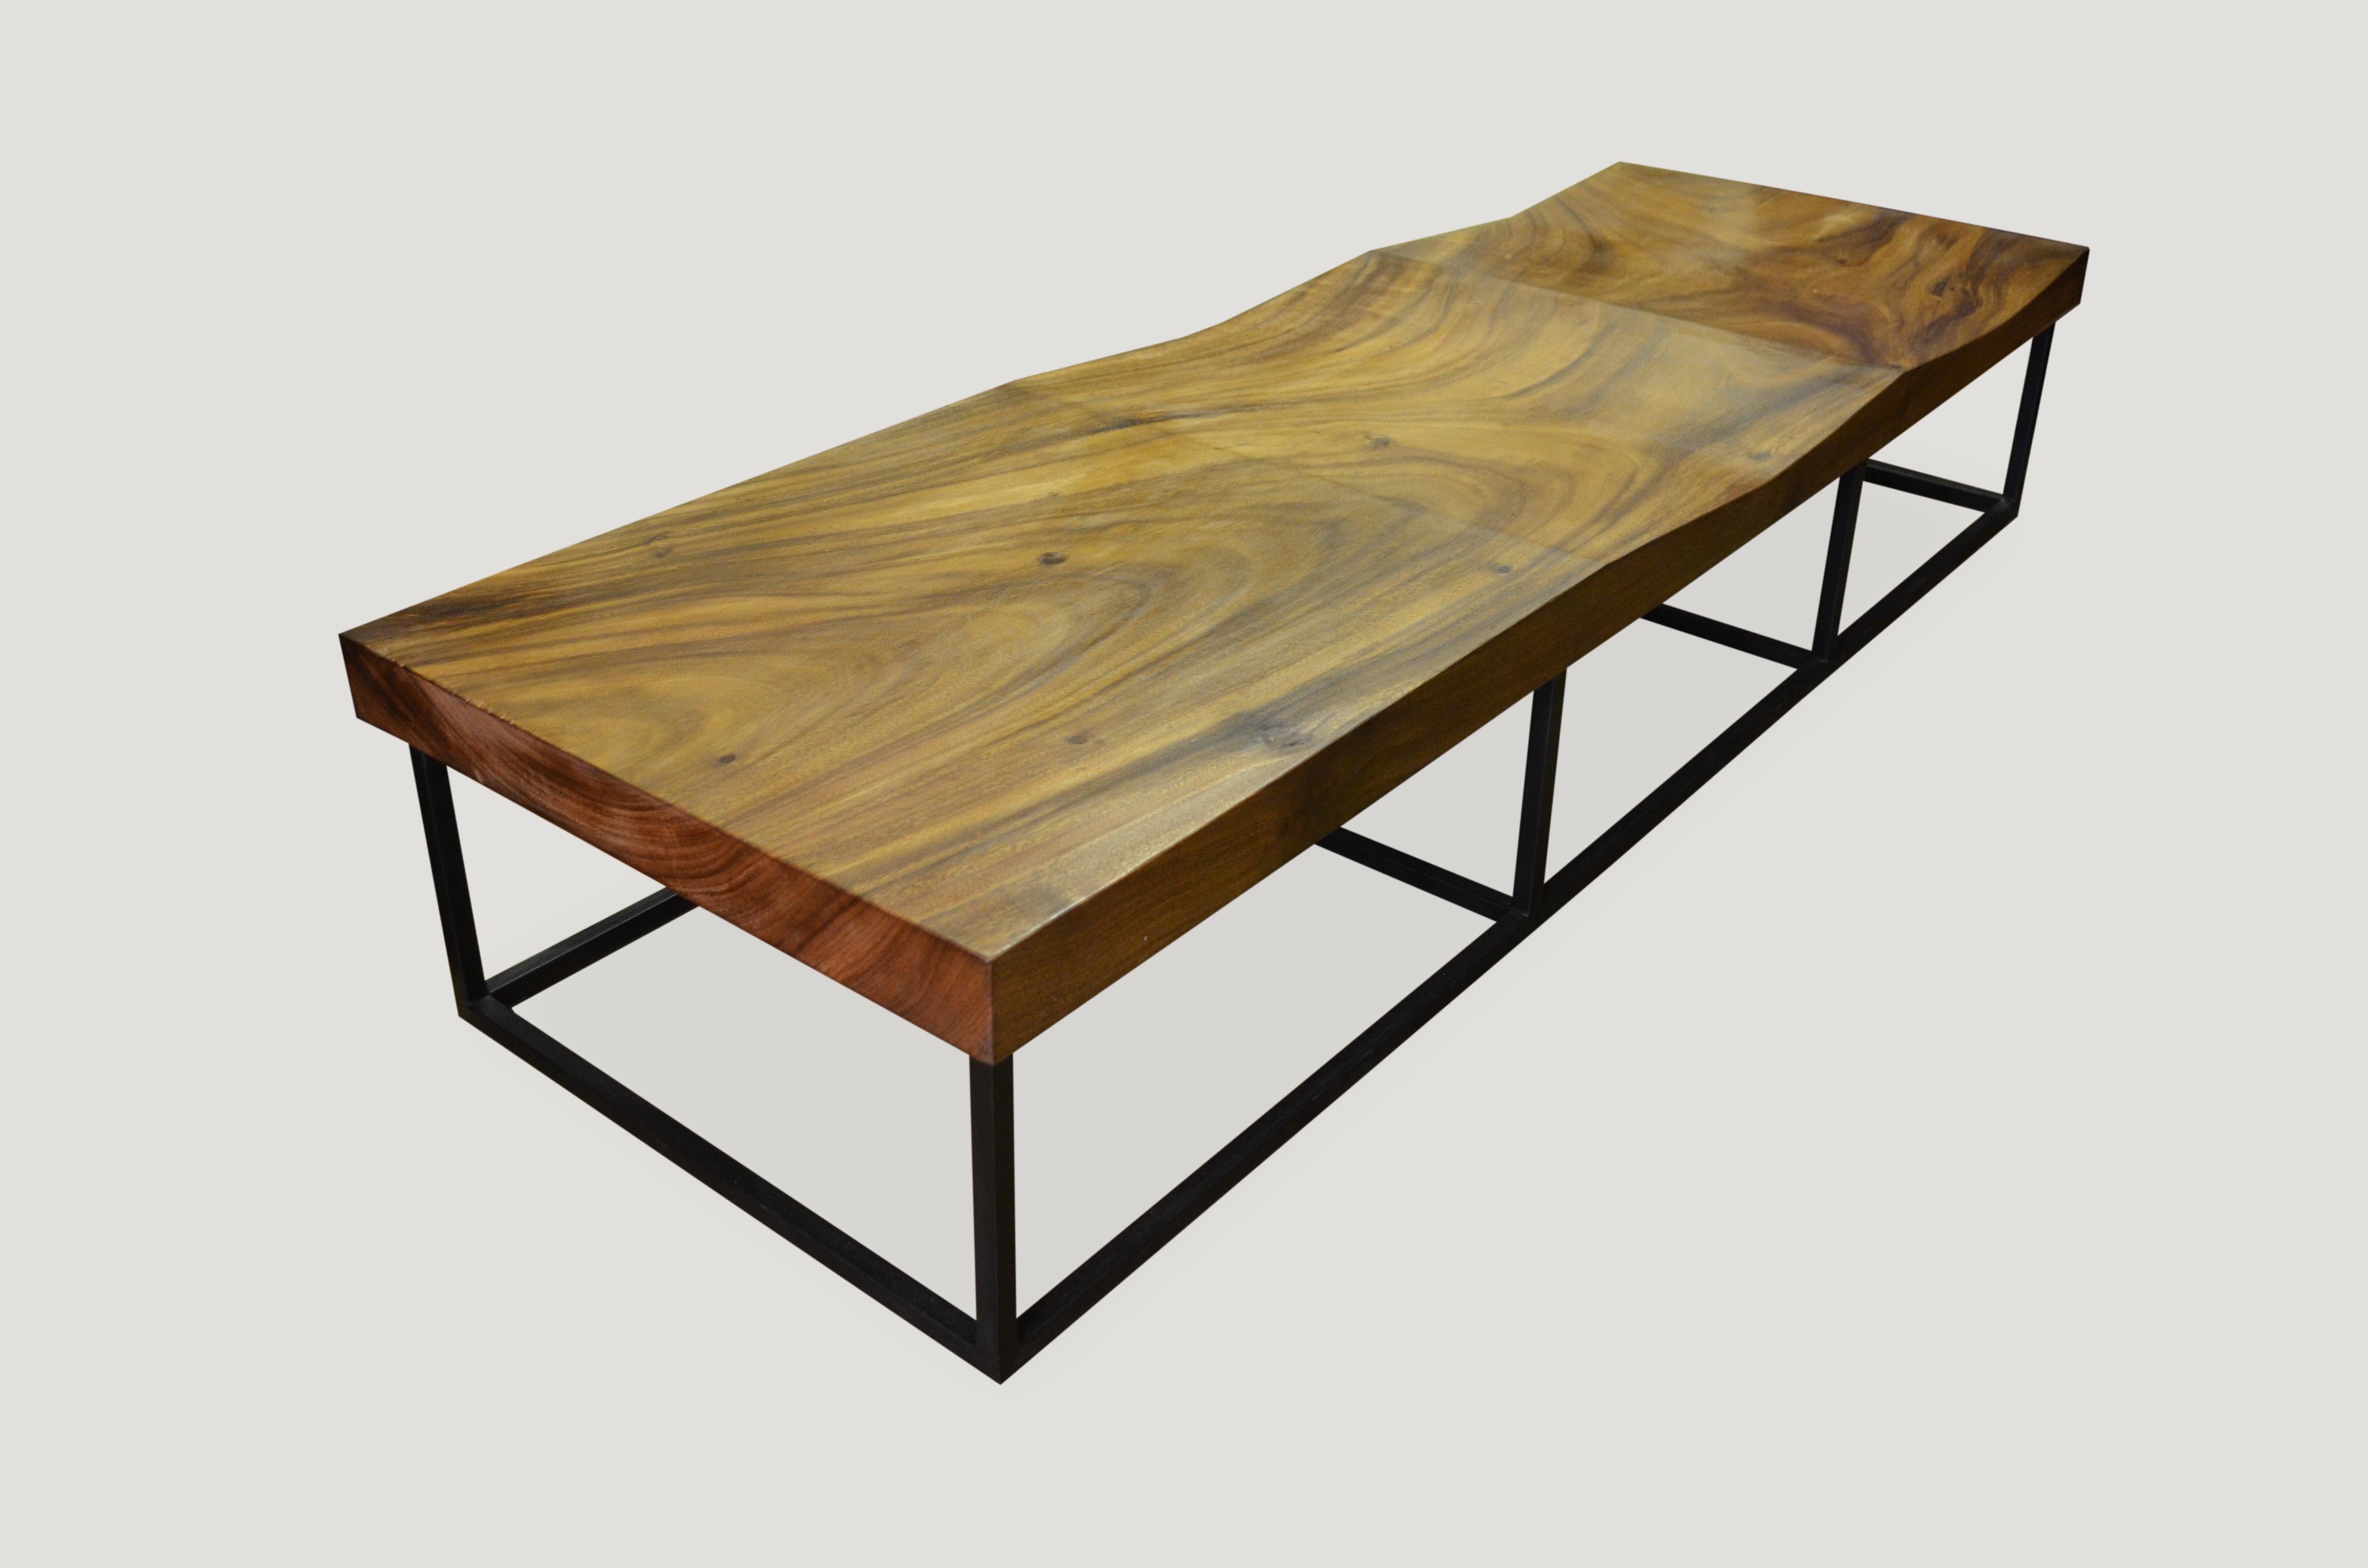 A single 3” thick slab of reclaimed suar wood, with a beautiful wood grain color tone. Set on a modern metal base. There is a soft hand carved wave for seating and a 25.5” long flat section which can be used as seating or for a side table/coffee